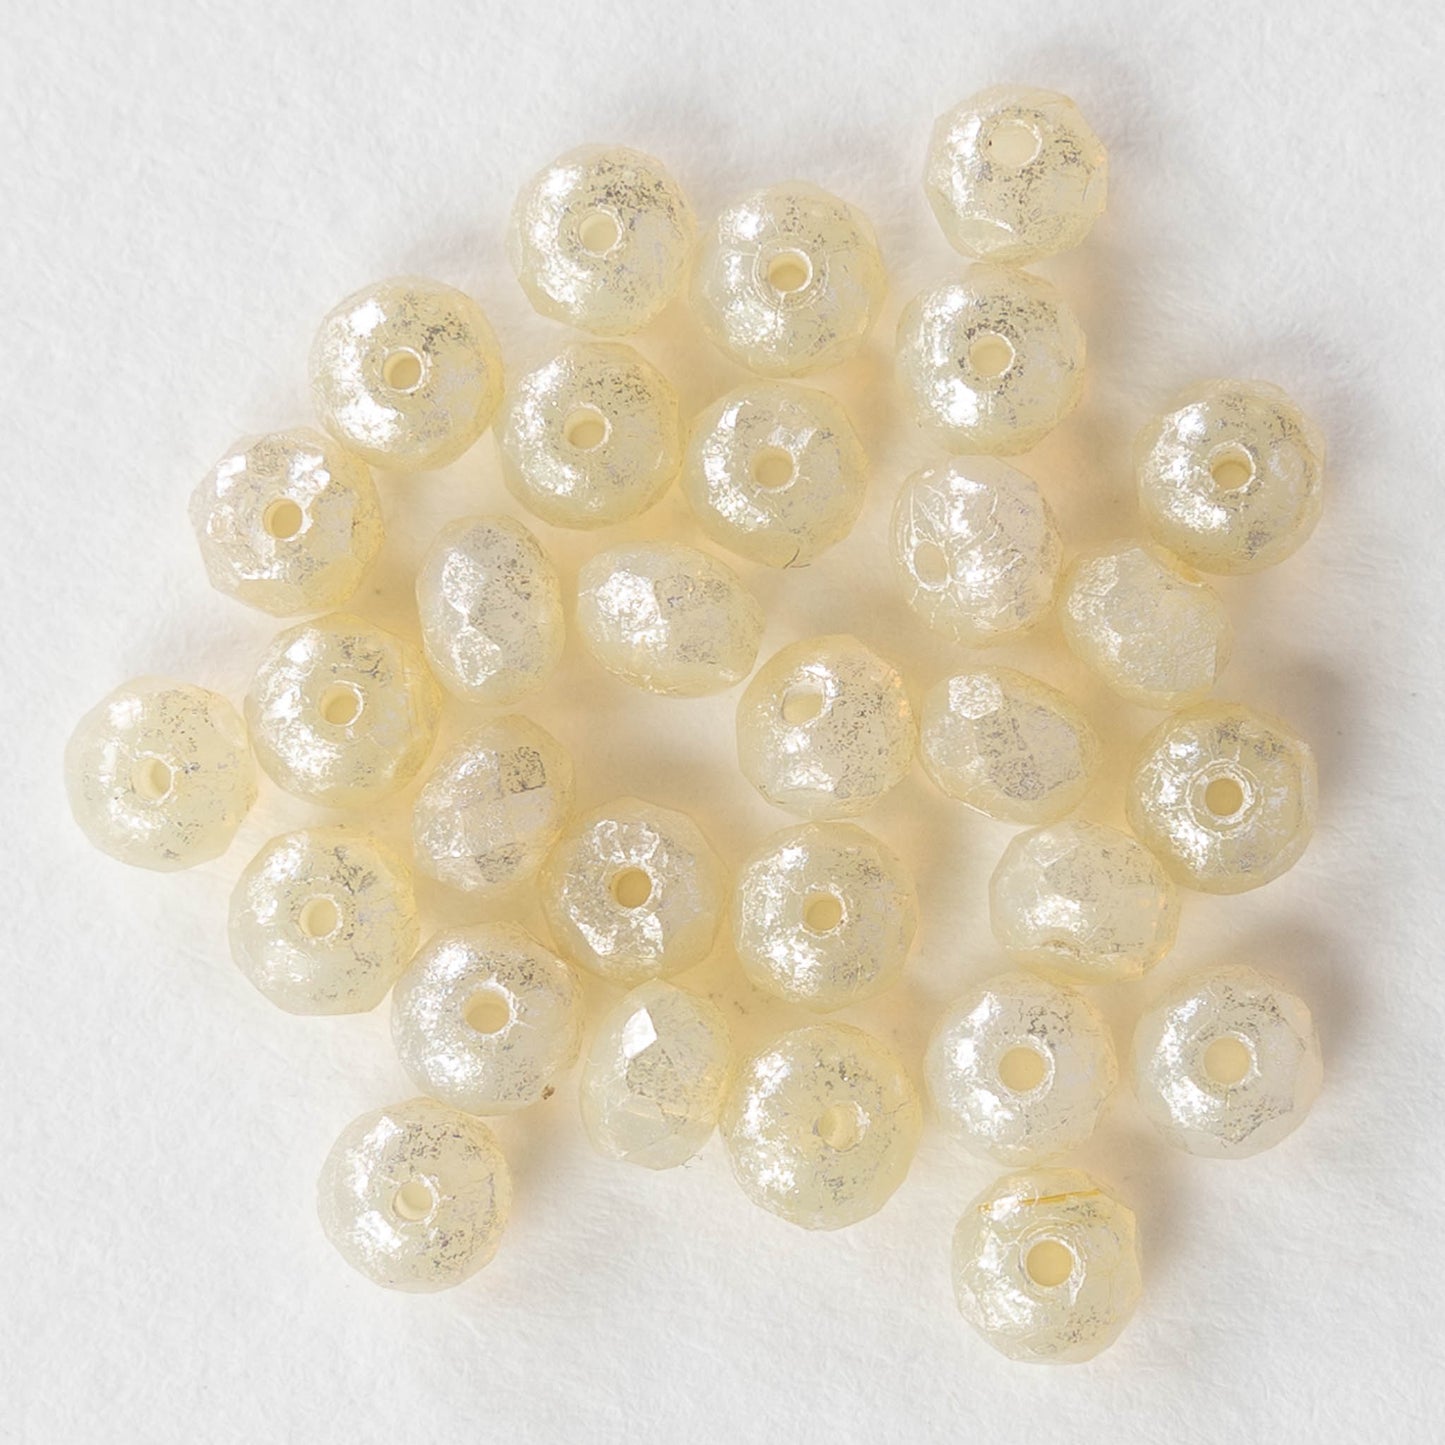 3x5mm Firepolished Rondelles - Ivory with a Mercury Finish - 30 beads